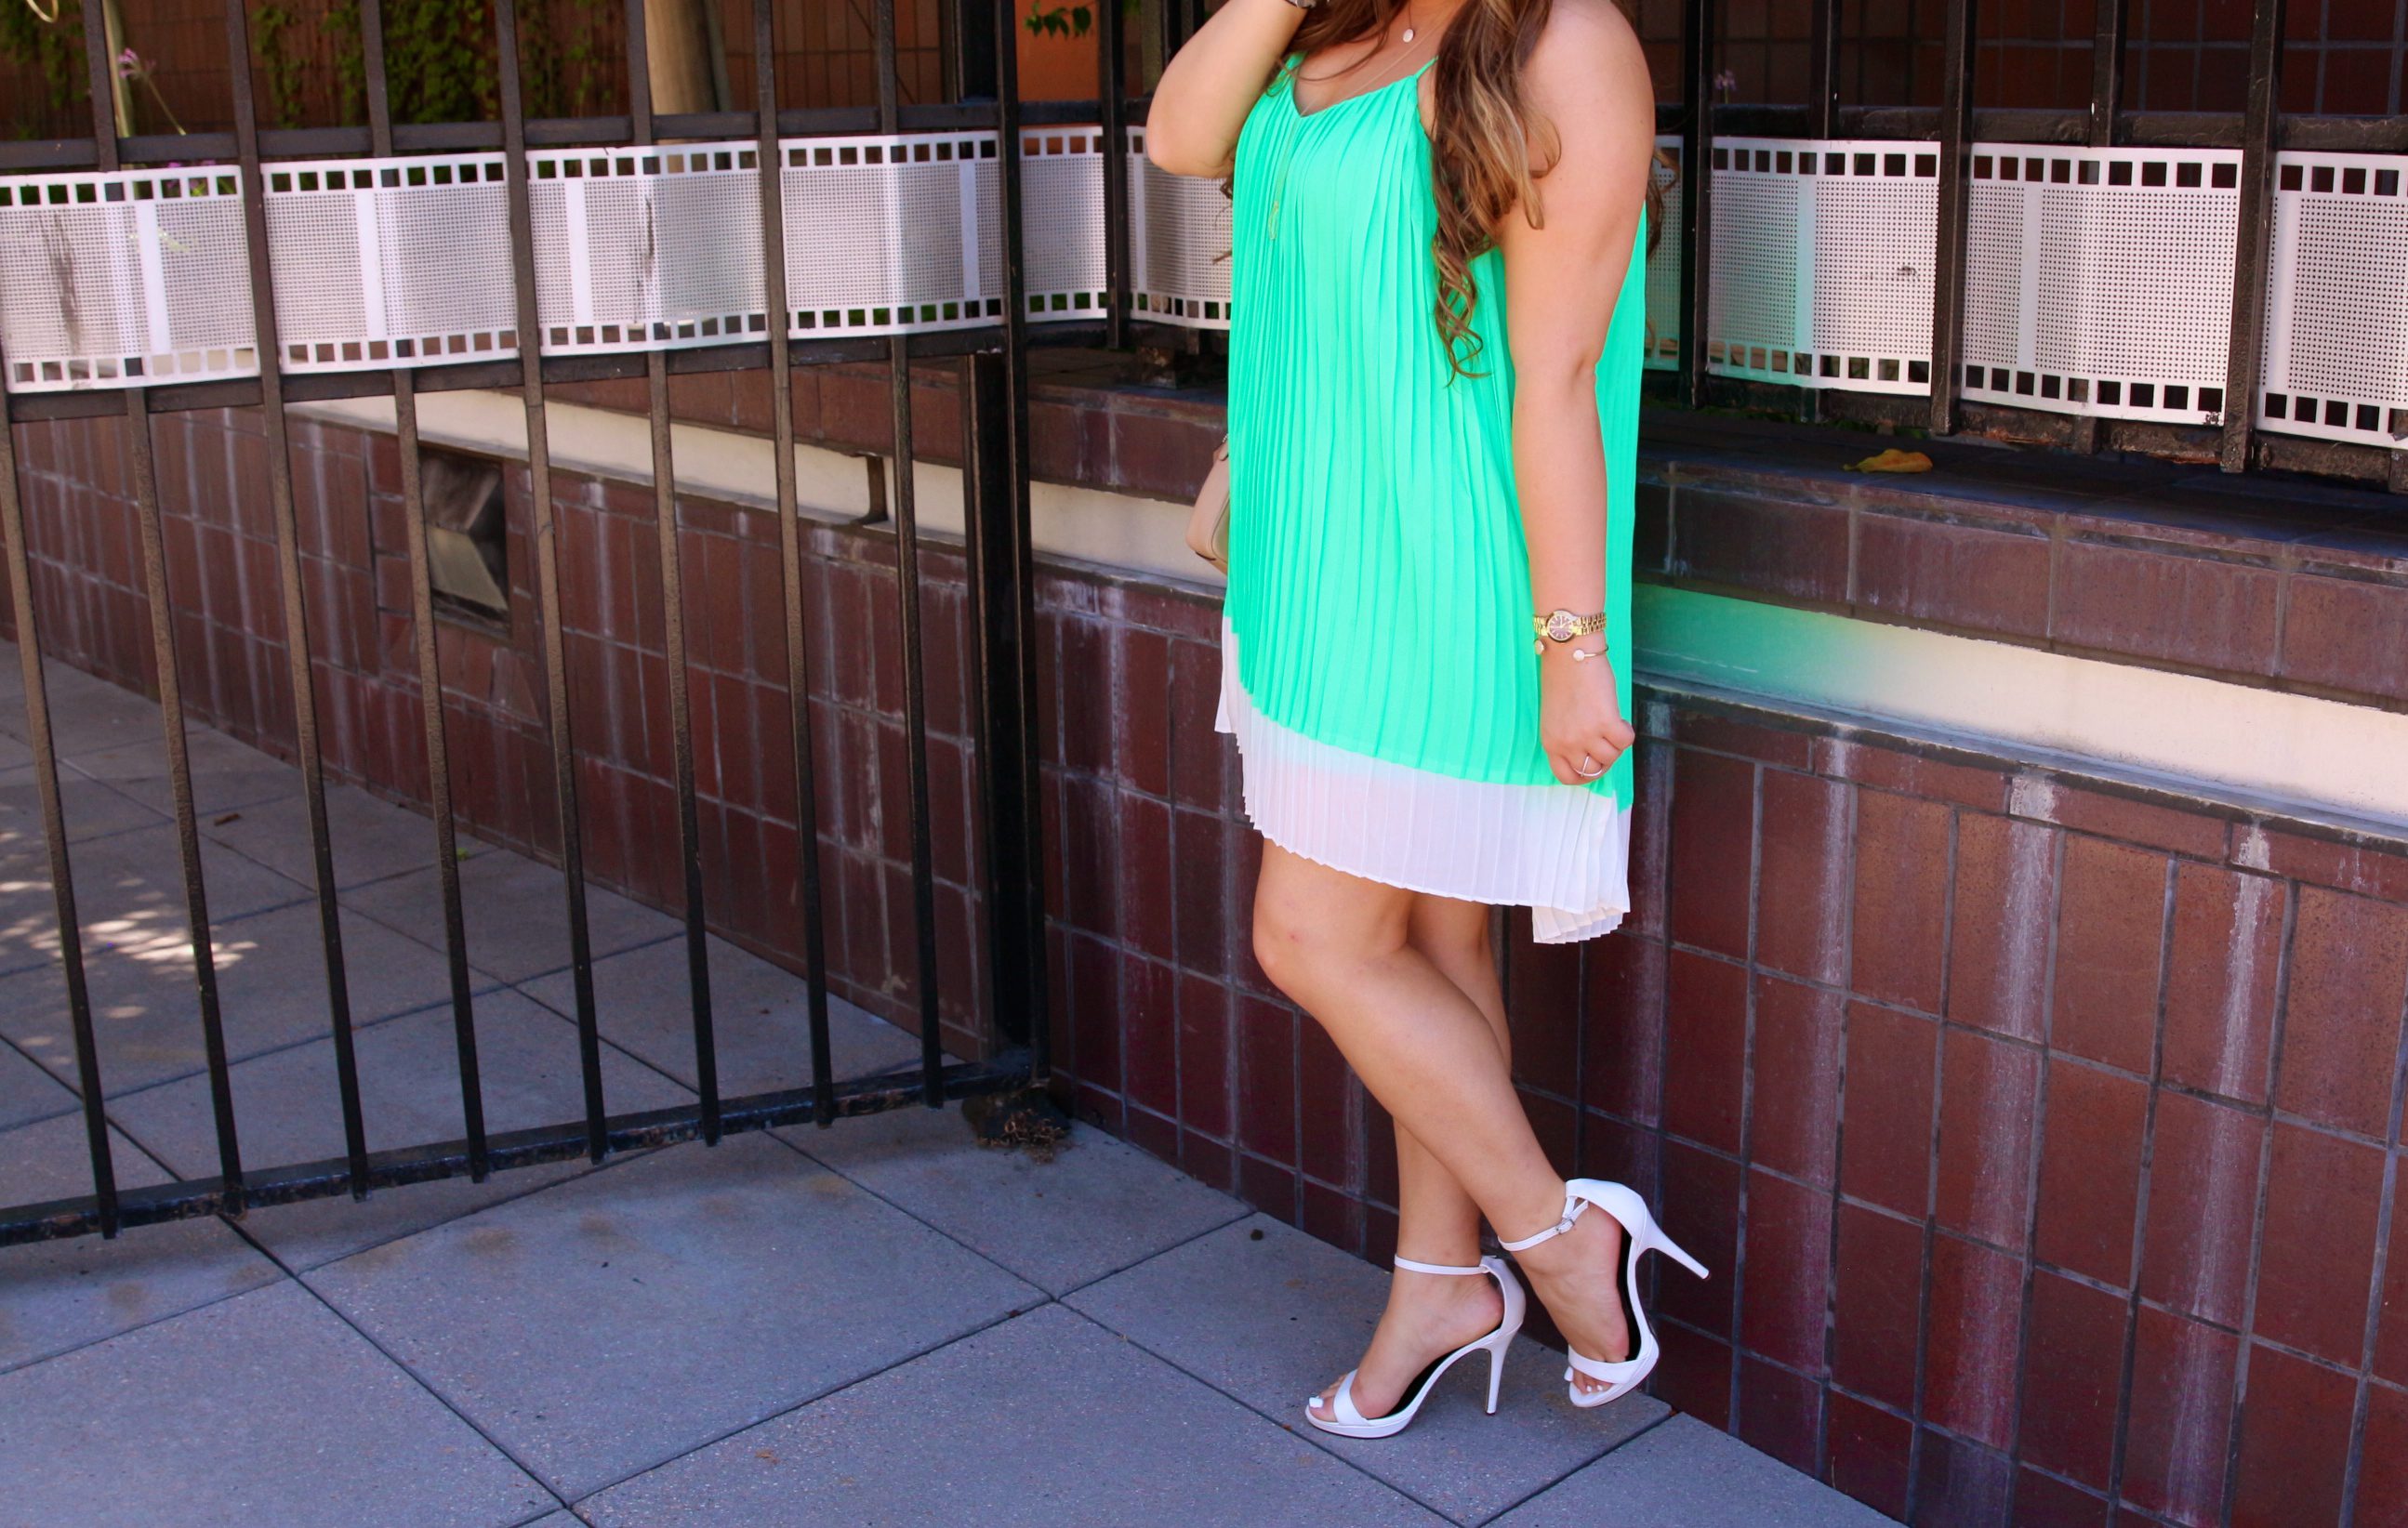 missyonmadison, melissa tierney, la blogger, la photography, la, fashion blogger, outfit inspo, outfit inspiration, mint green dress, shop the mint, mint julep, white ankle strap heels, white ankle strap sandals, michael antonio white heels, dsw, dsw shoe lovers, coach crossbody, beige coach crossbody, beige crossbody bag, brunette hair, curled hair, brunette hairstyle, circle necklace, circle pendant necklace, x ring, how to wear color, how to wear green, summer dresses,